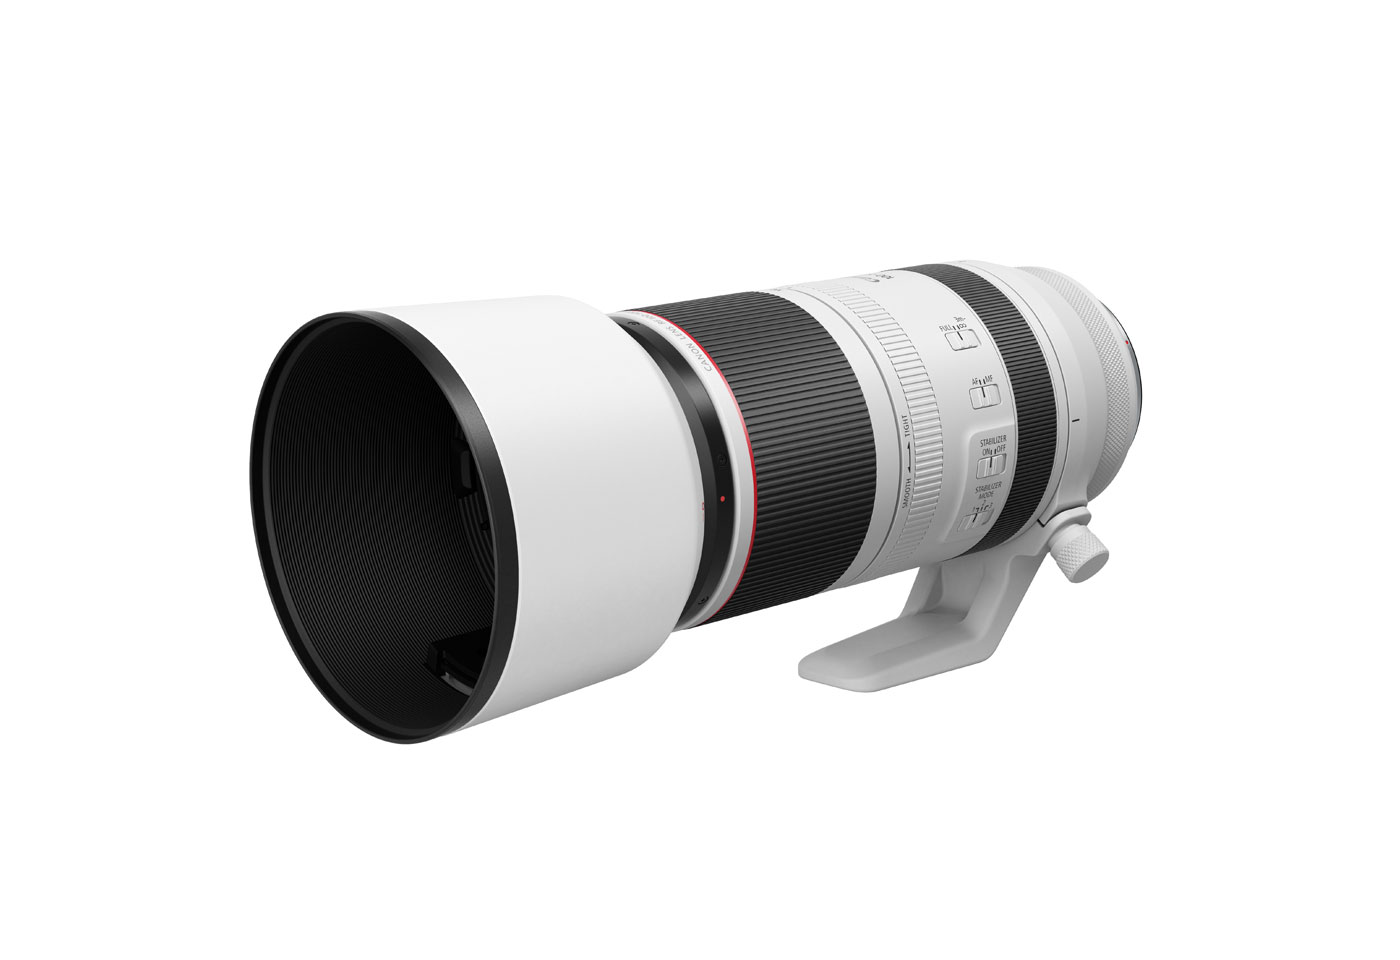 Profile image of RF 100-500mm f/4.5-7.1 L IS USM telephoto lens with hood